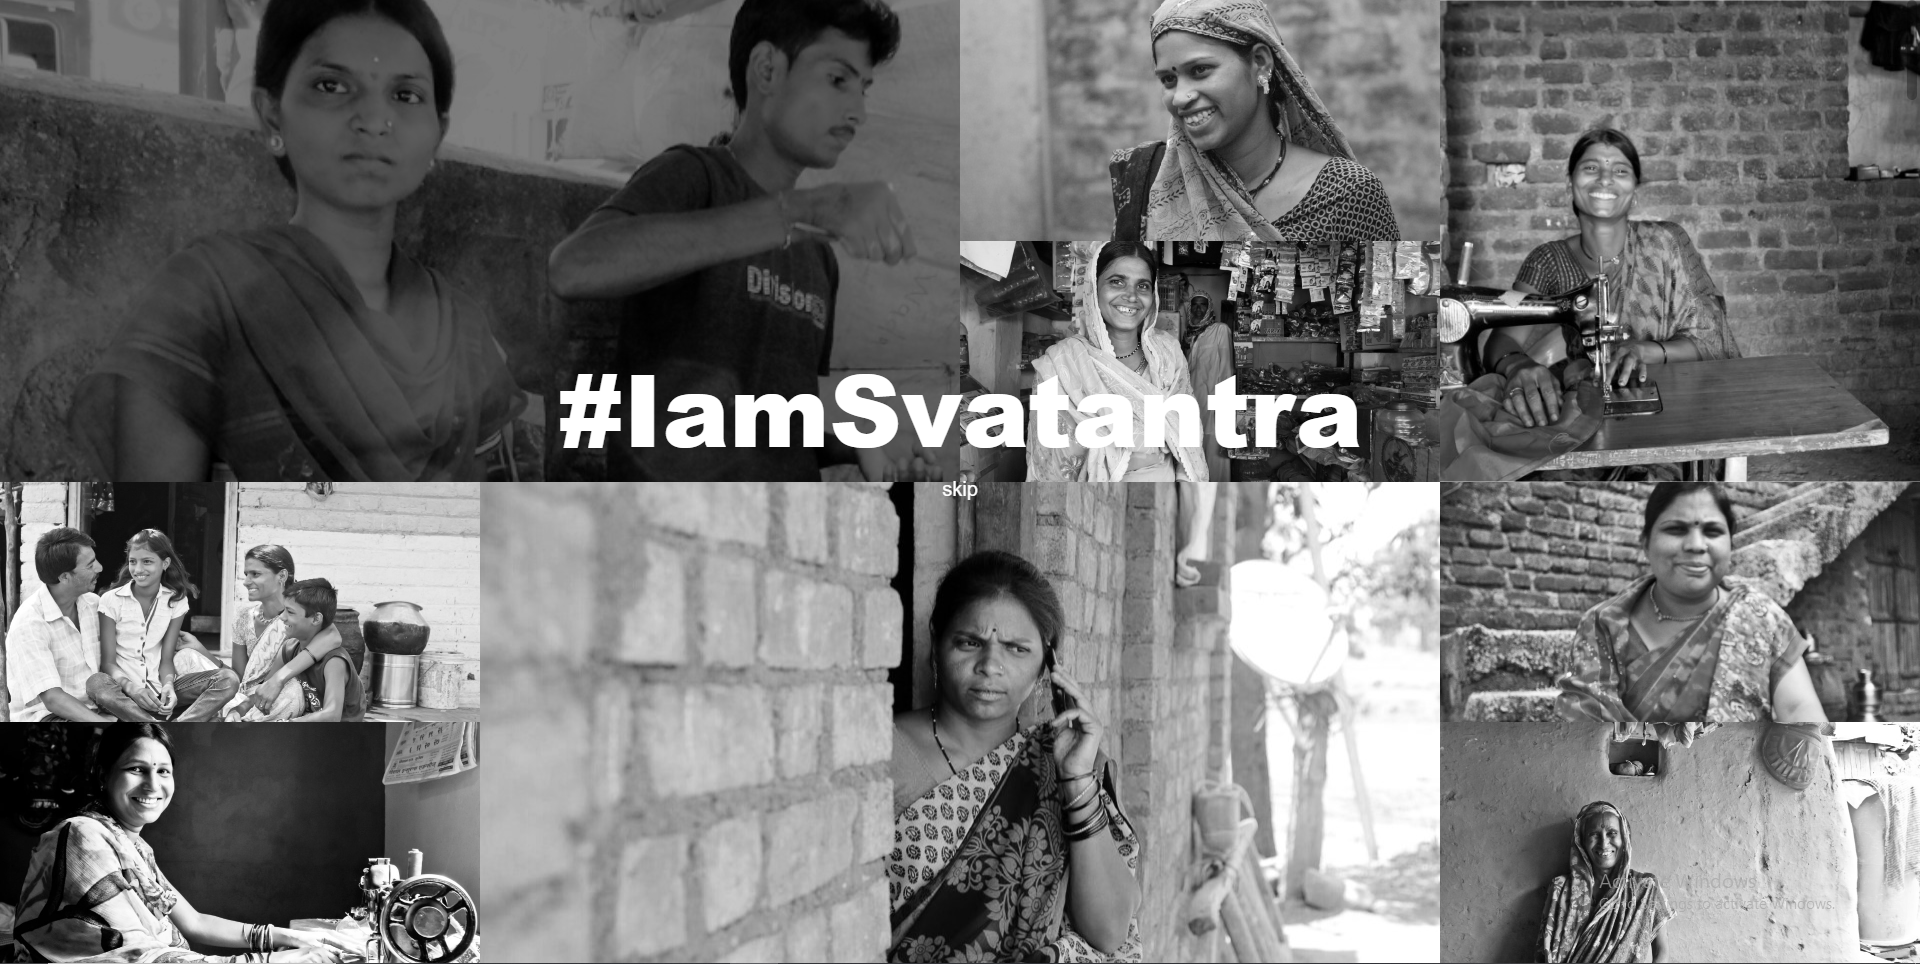 Svatantra Microfin – A MicroFin company changing the lives of women in Rural India